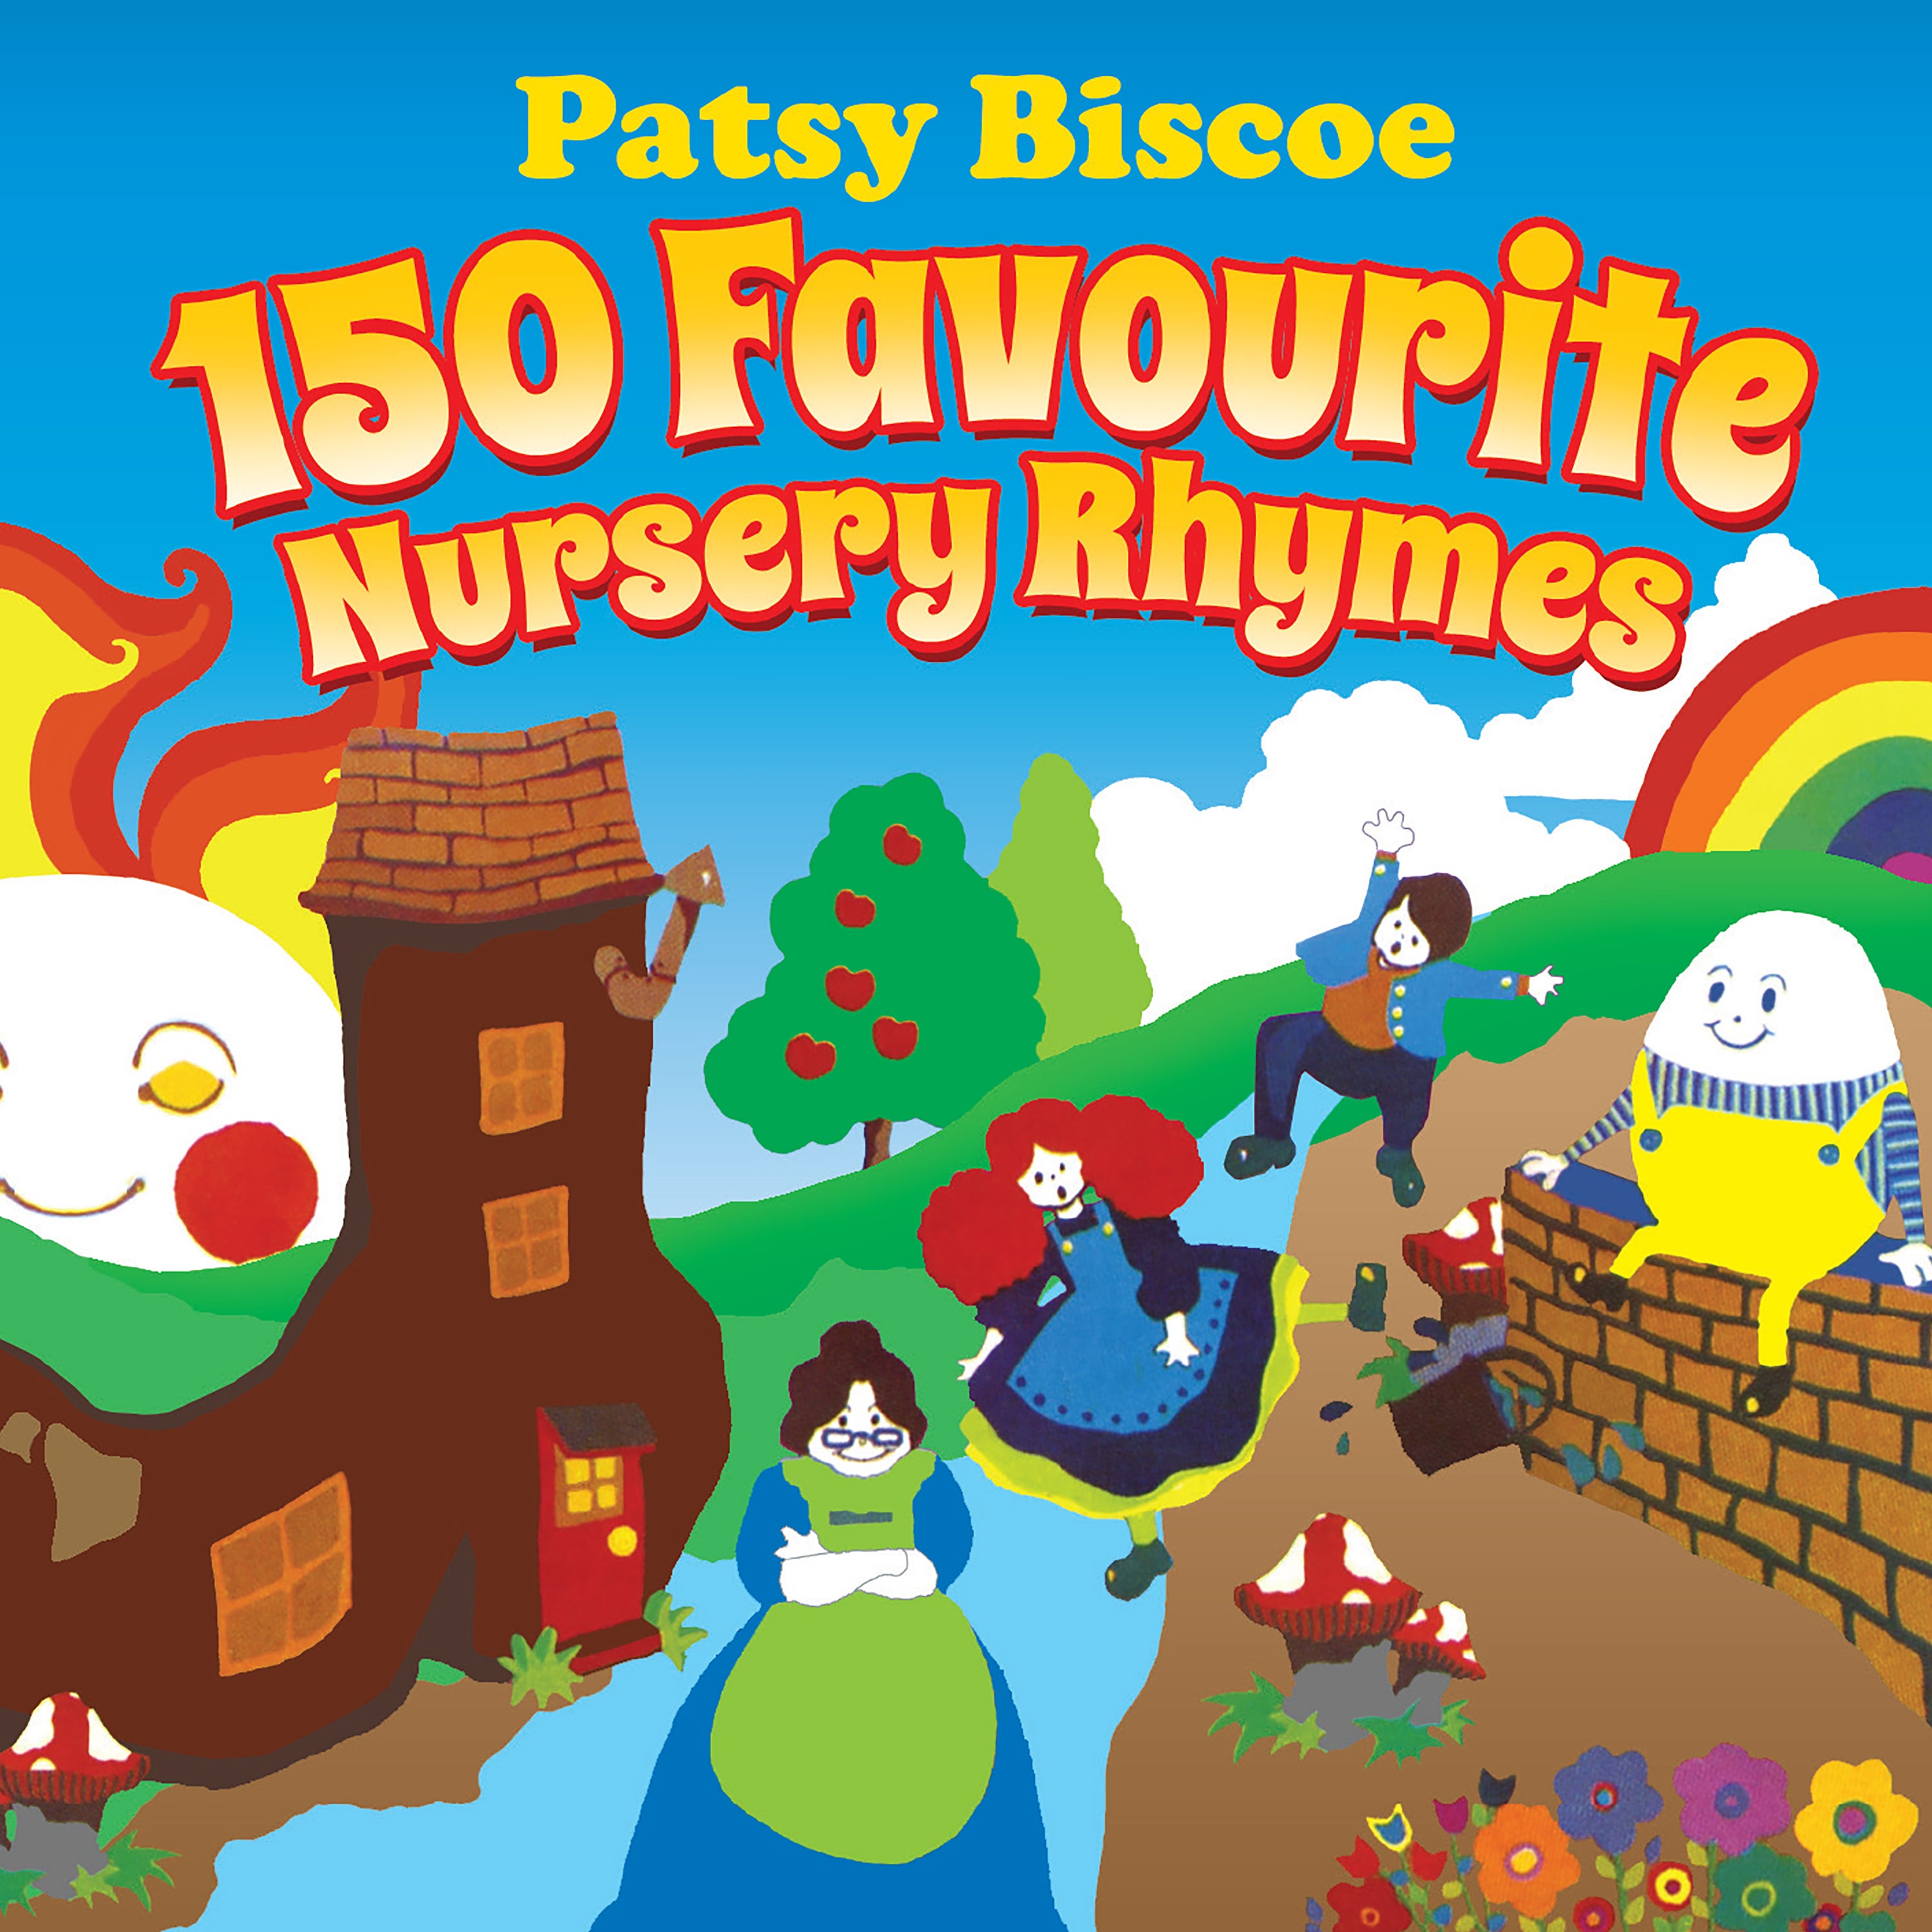 PATSY BISCOE - 150 FAVOURITE NURSERY RHYMES